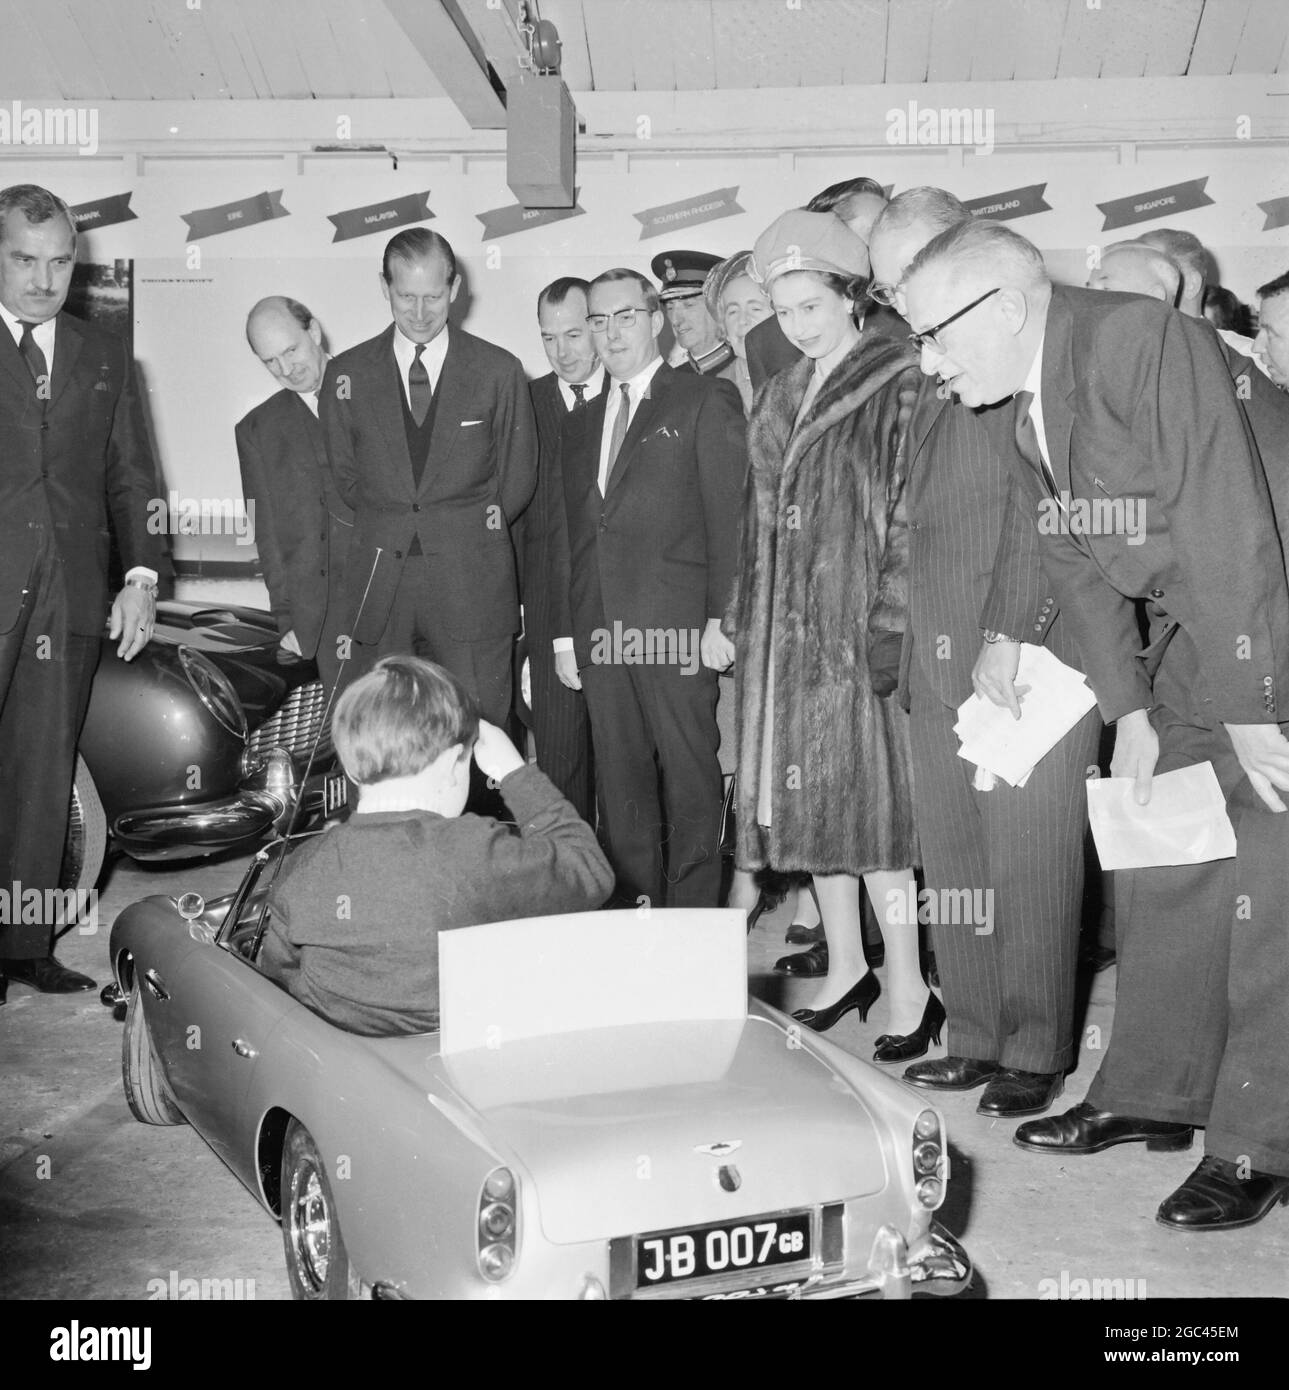 A gift for Prince Andrew: Newport, Pragnell , Buckinghamshire , England: Britain's Queen Elizabeth II and her consort Prince Philip The Duke of Edinburgh are pictured watching Ian Heggie, age 6, demonstrating a scale model of the famous James Bond car during their visit to North Buckinghamshire today. The demonstration took place at the Aston Martin Lagonda factory, which is presenting the model to Prince Andrew, the 6 year old third child of the Queen. The model is complete with electronic machine guns, which emit only, a realistic noise and are concealed in the sidelights, and a smoke screen Stock Photo